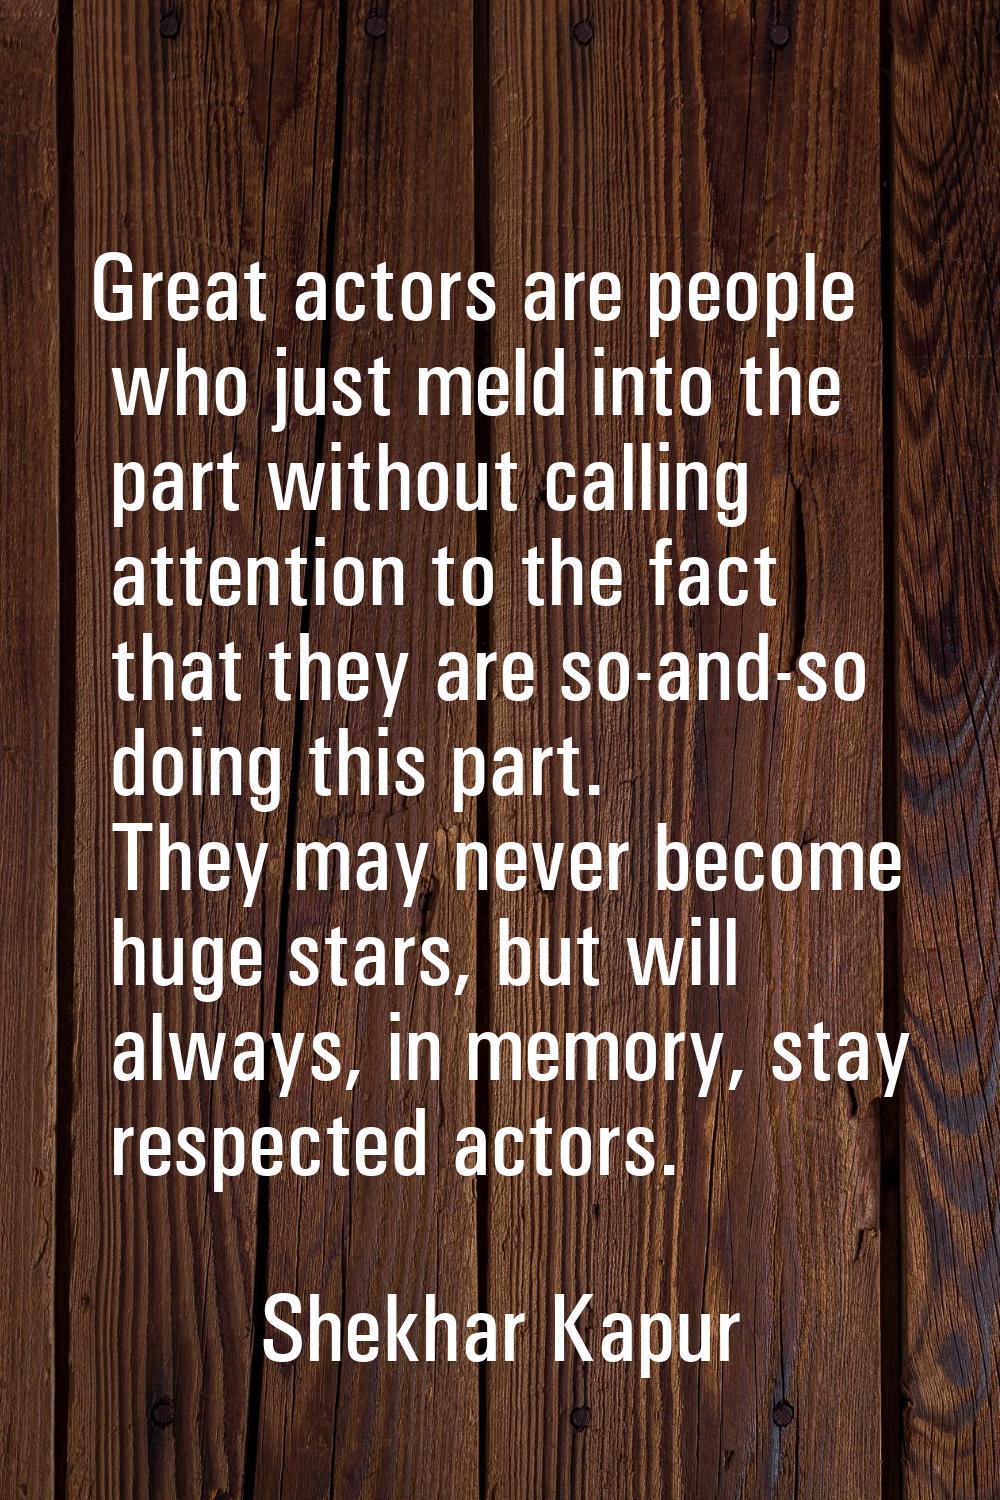 Great actors are people who just meld into the part without calling attention to the fact that they